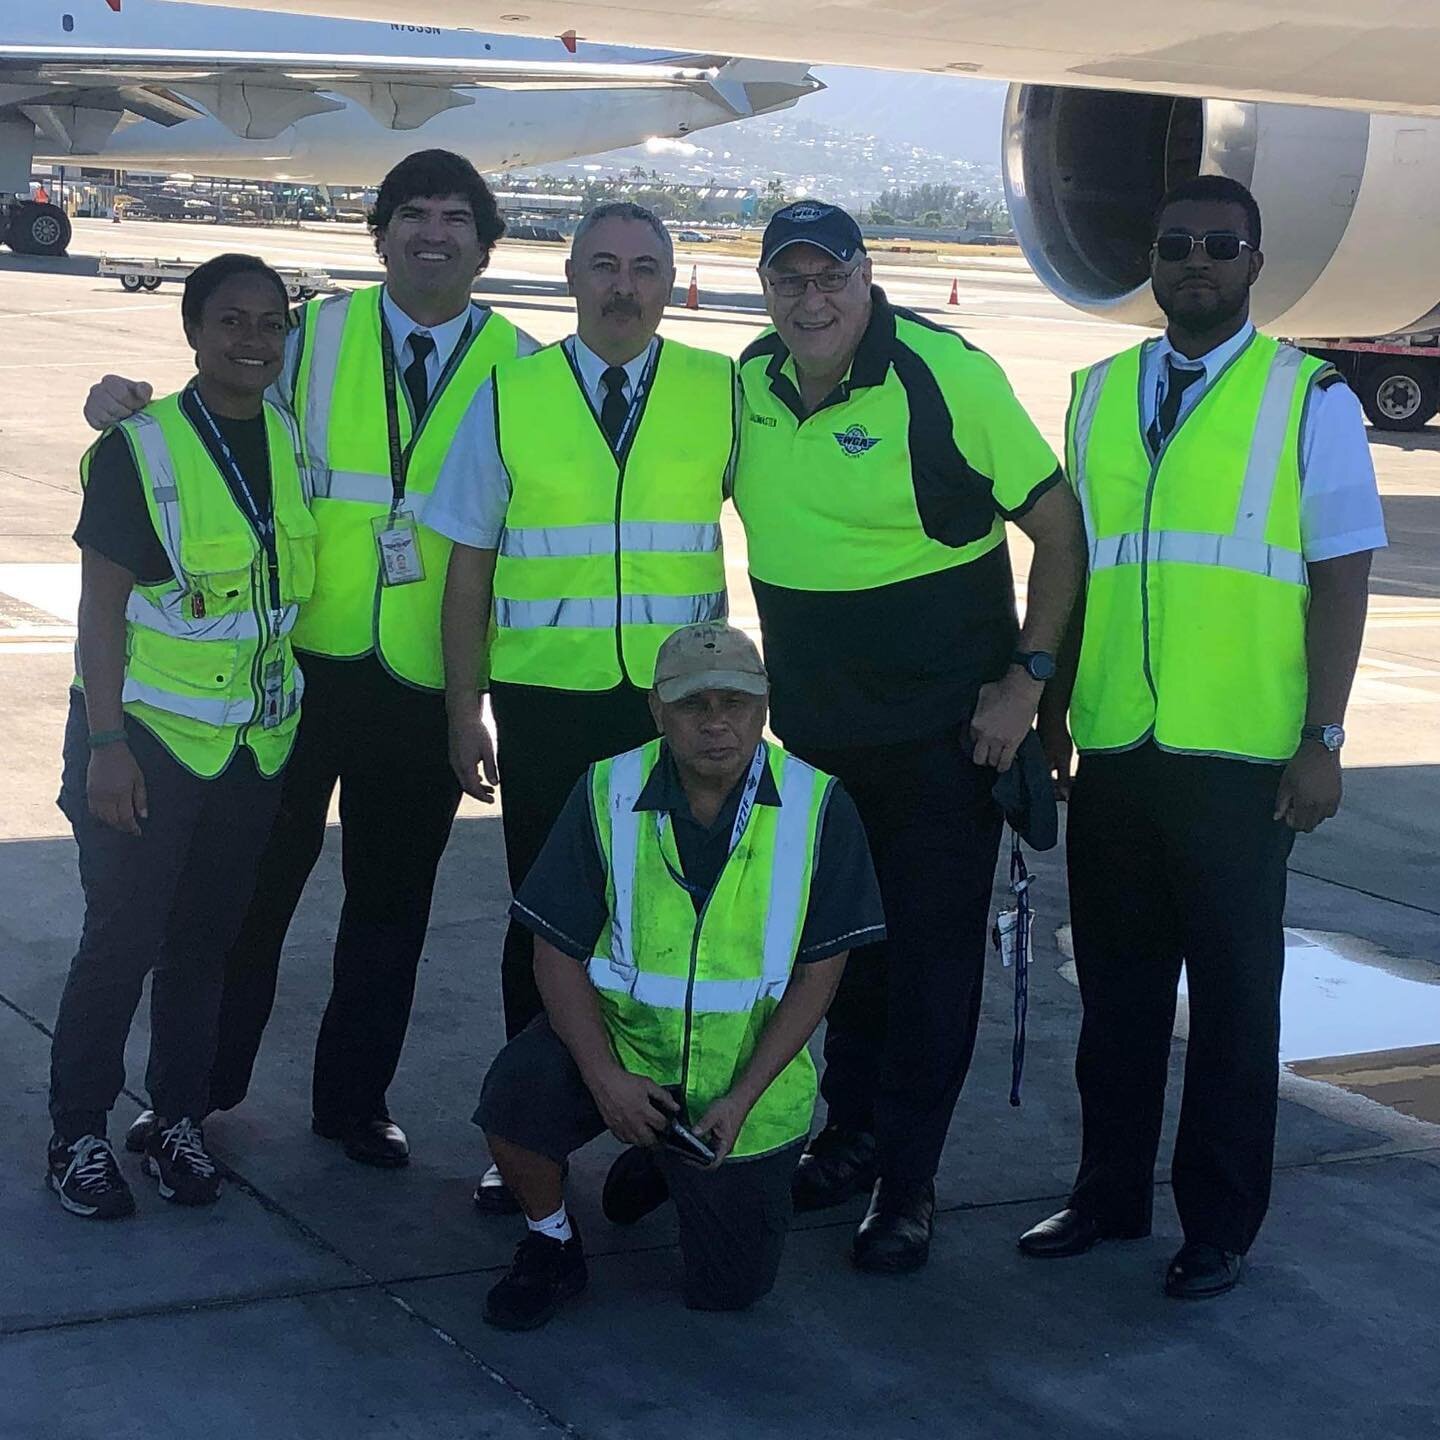 Thank you to all of our dedicated team members! This fun, hardworking crew is getting ready to depart beautiful #hawaii.